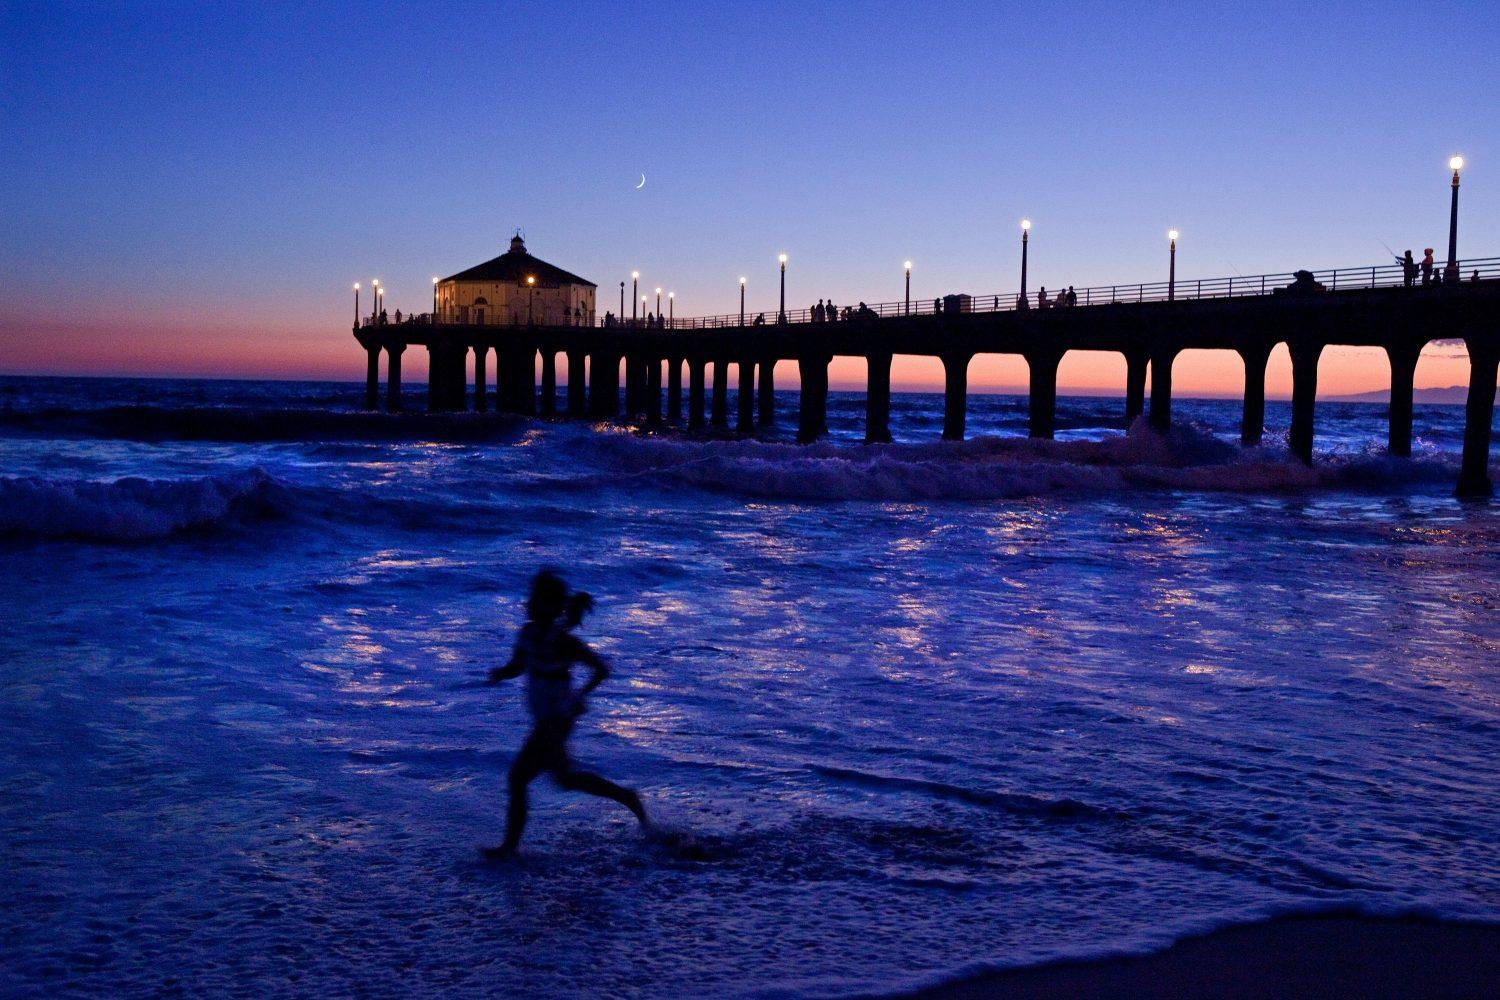 Beaches and Southern California go hand-in-hand. There are hundreds of beaches to choose to visit during Spring Break. (Ricardo DeAratanha/Los Angeles Times/MCT)